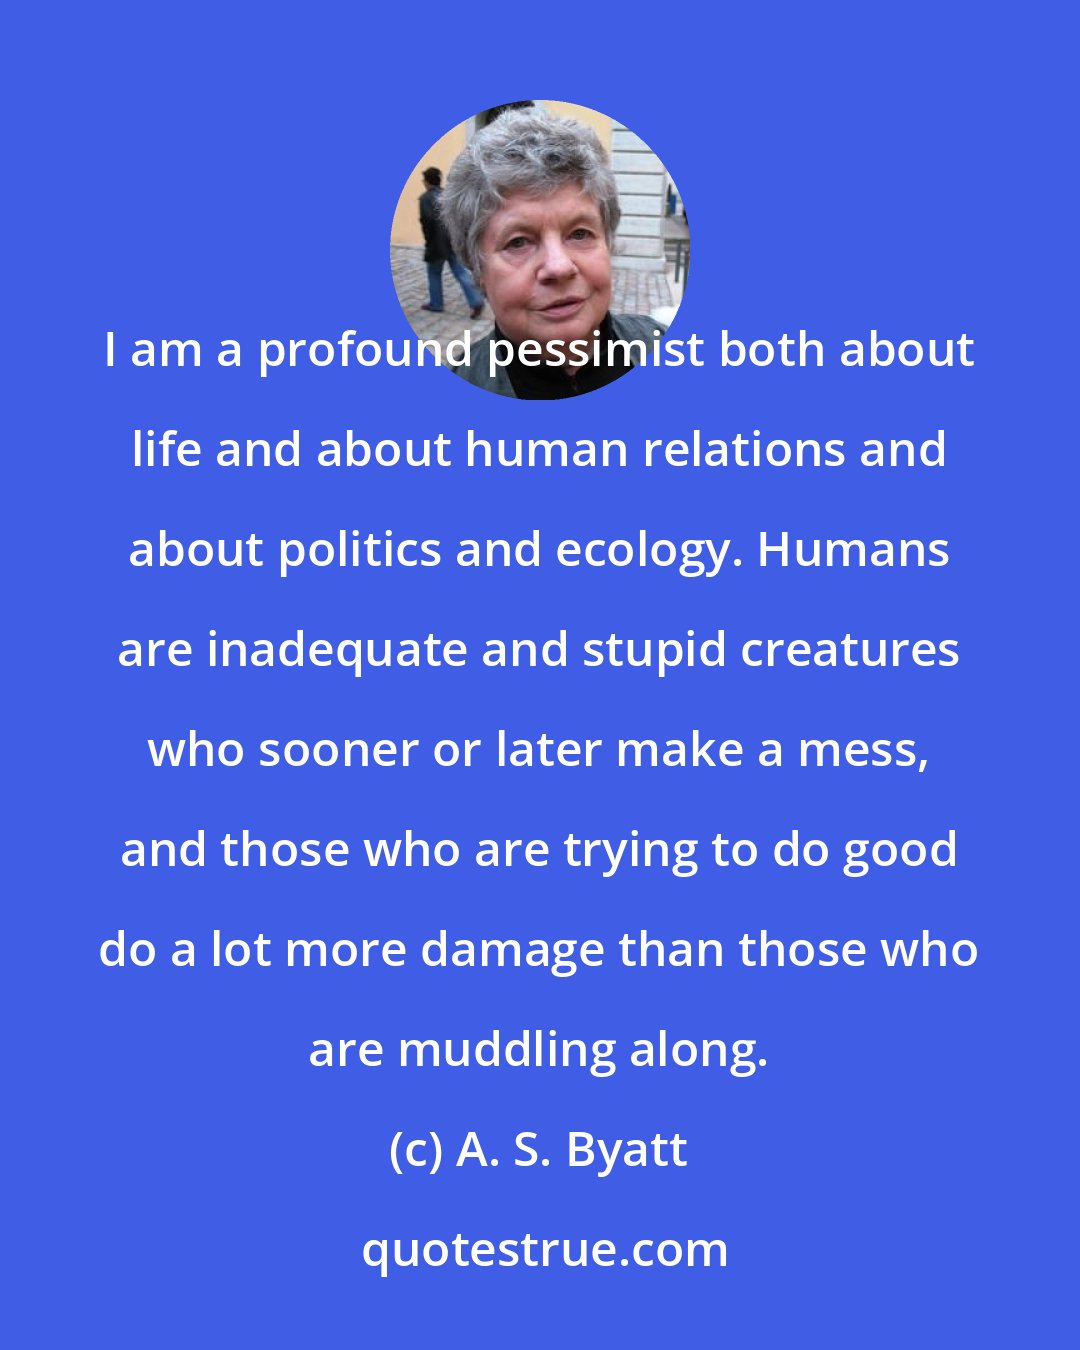 A. S. Byatt: I am a profound pessimist both about life and about human relations and about politics and ecology. Humans are inadequate and stupid creatures who sooner or later make a mess, and those who are trying to do good do a lot more damage than those who are muddling along.